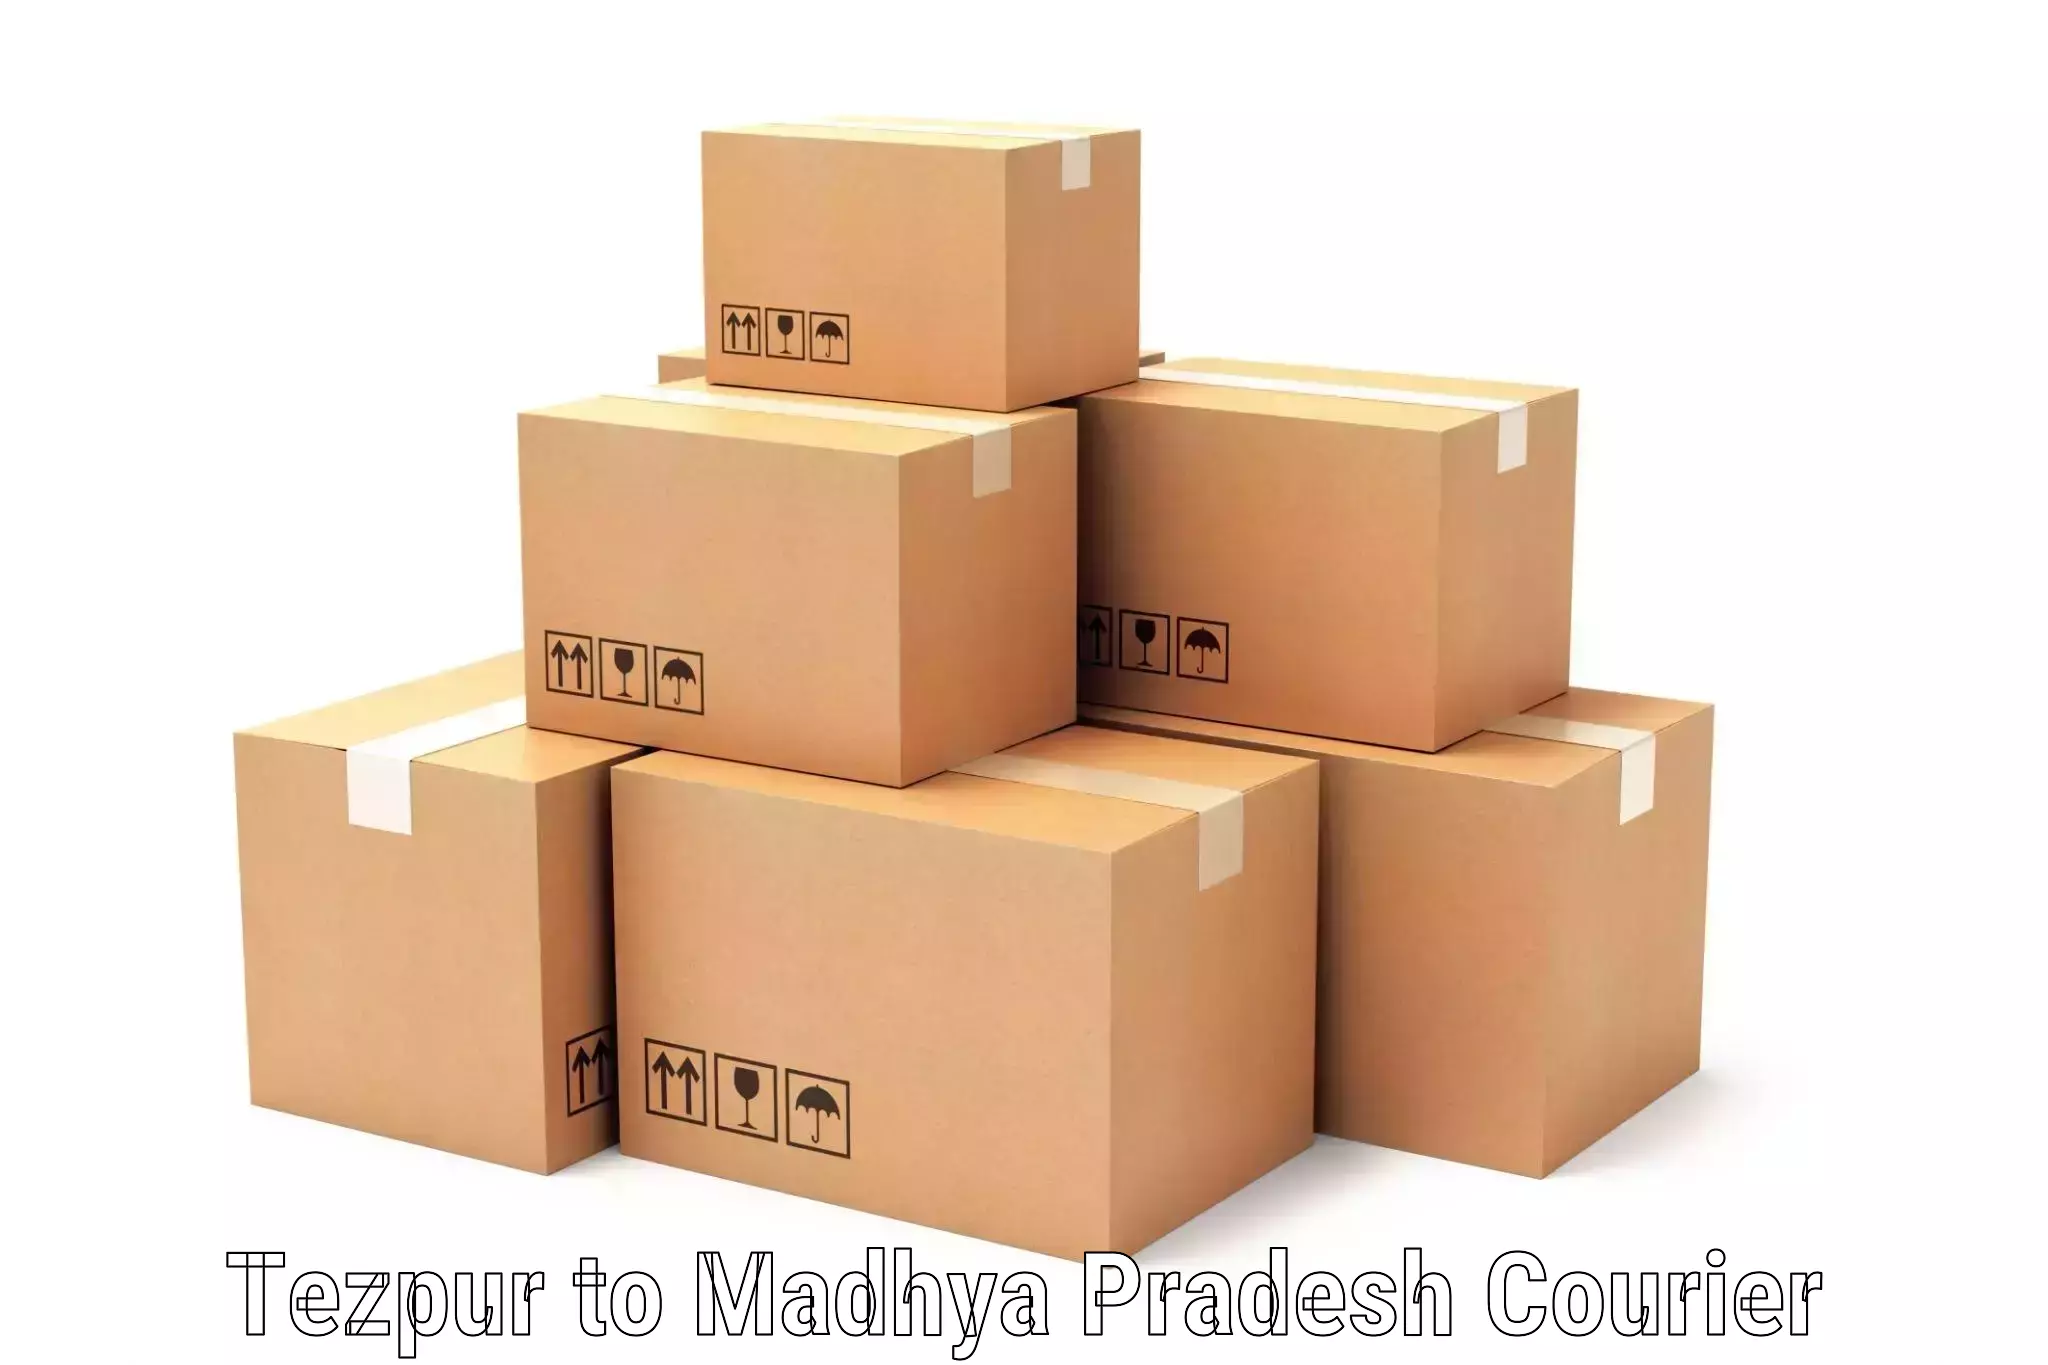 Rapid shipping services Tezpur to Indore